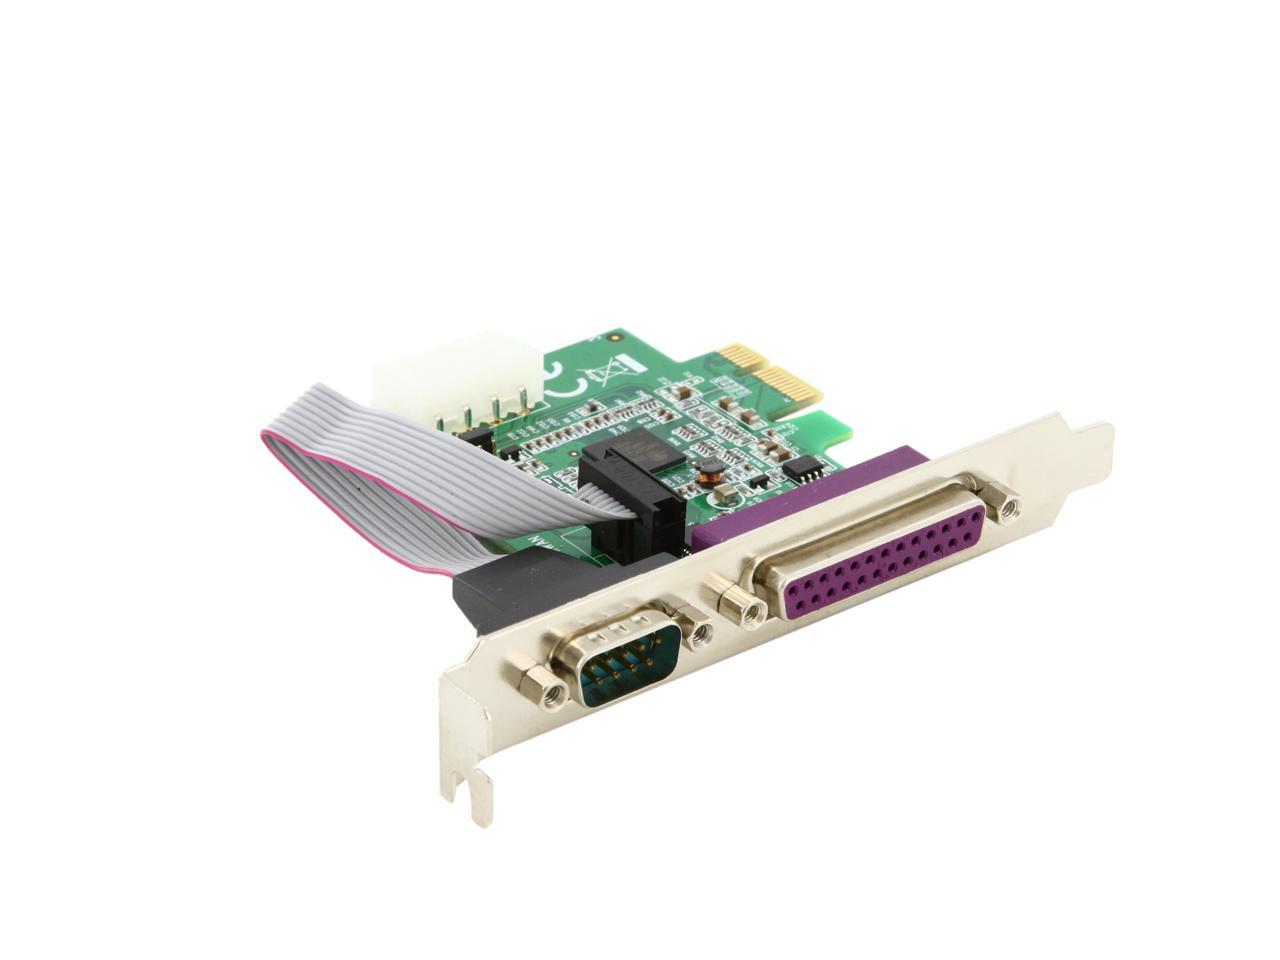 PEX1S1P952 StarTech.com 1S1P Native PCI Express Parallel Serial Combo Card with 16950 UART